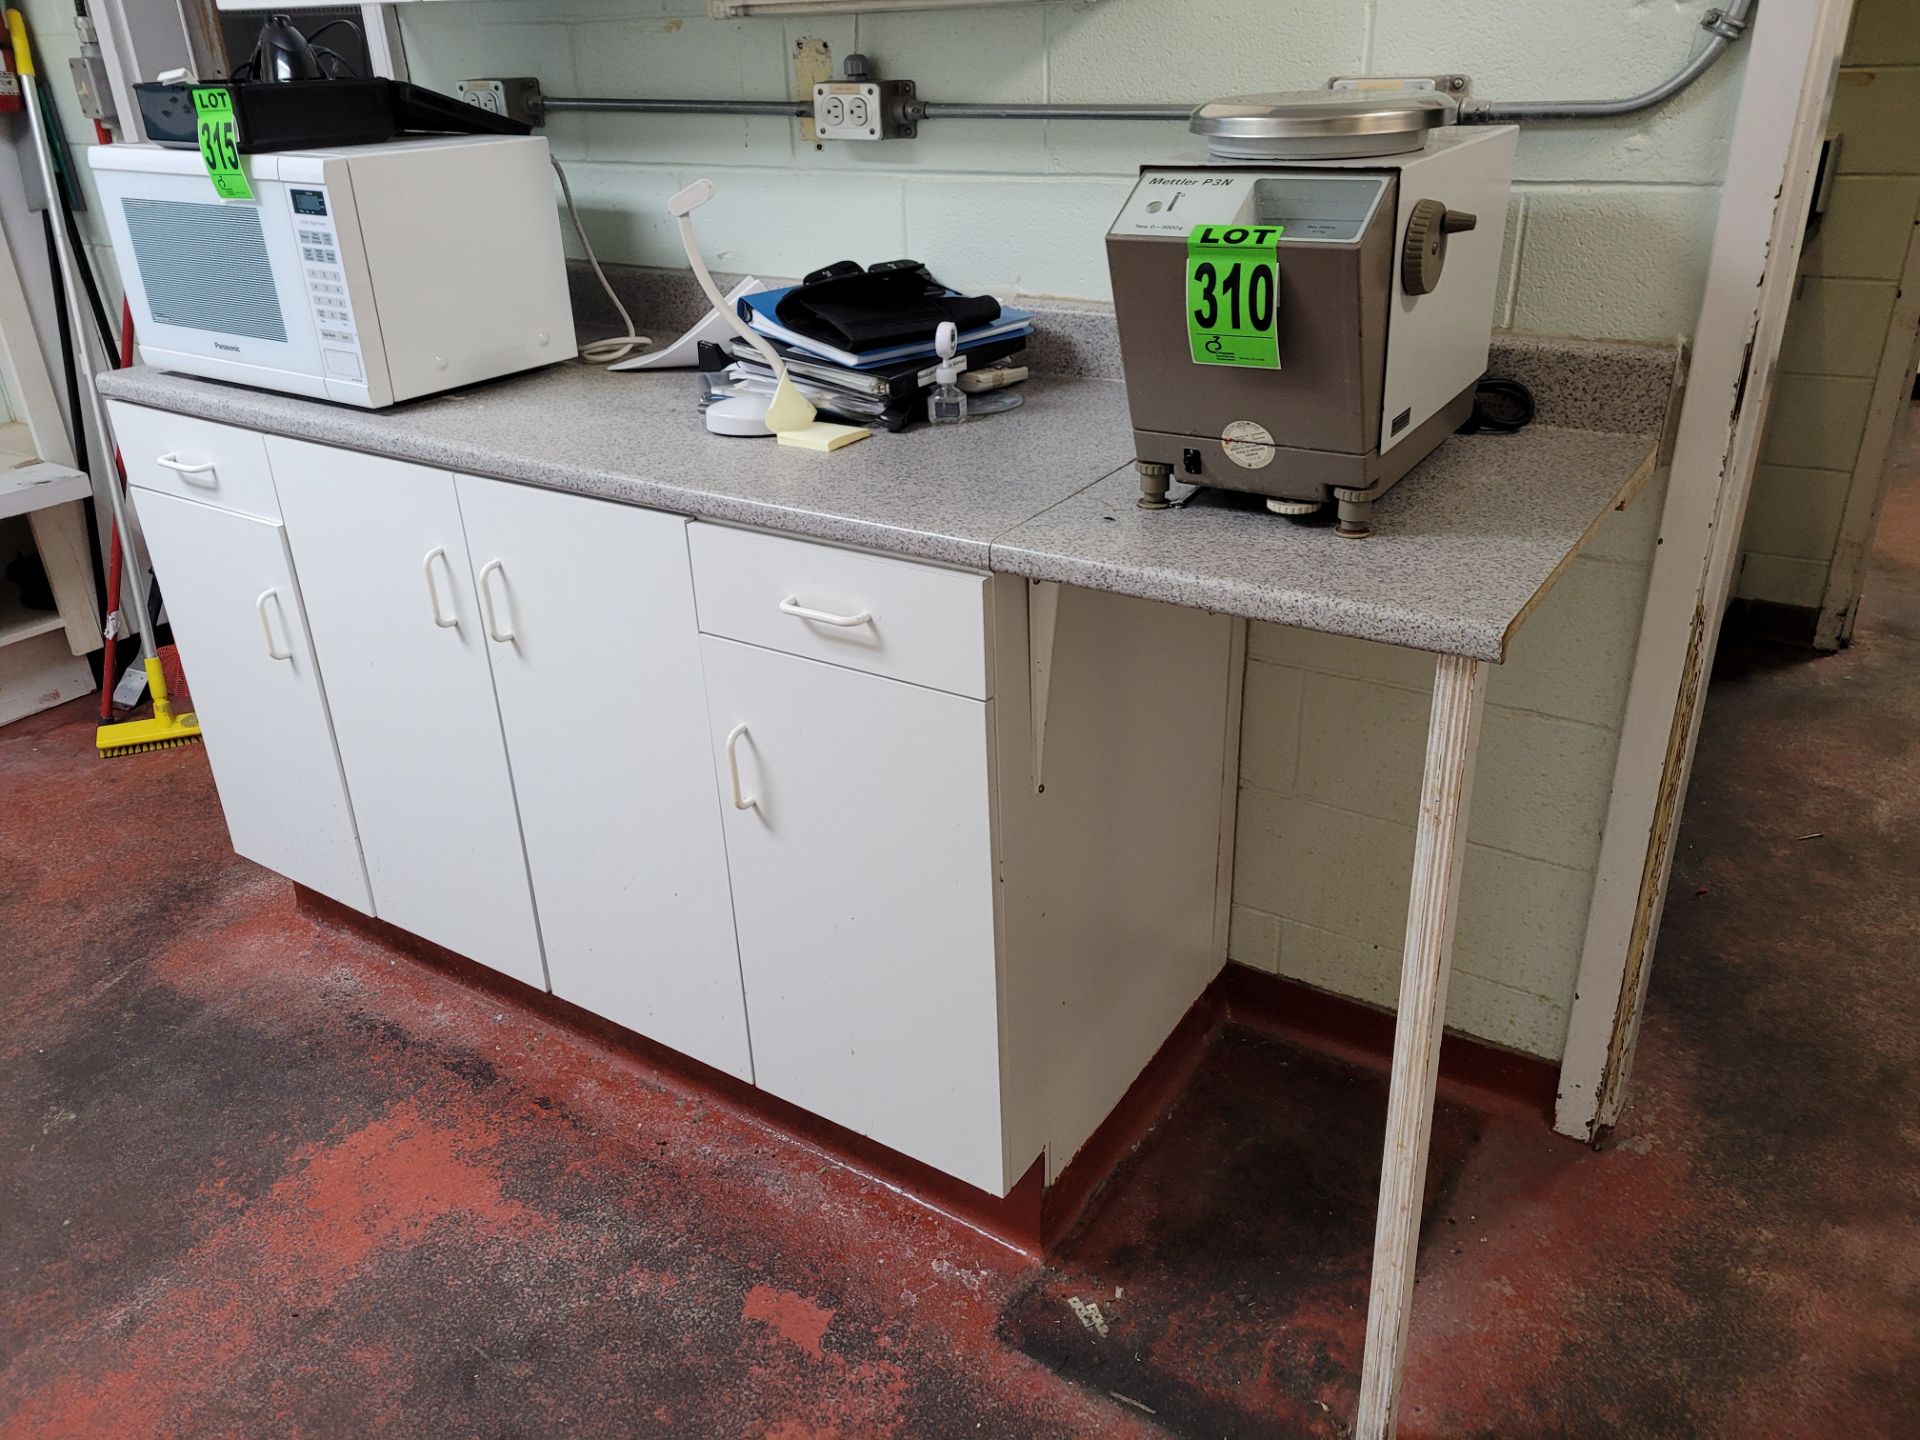 Lot of S/S Sinks and wooden cabinetry in Laboratory Area - Image 10 of 12